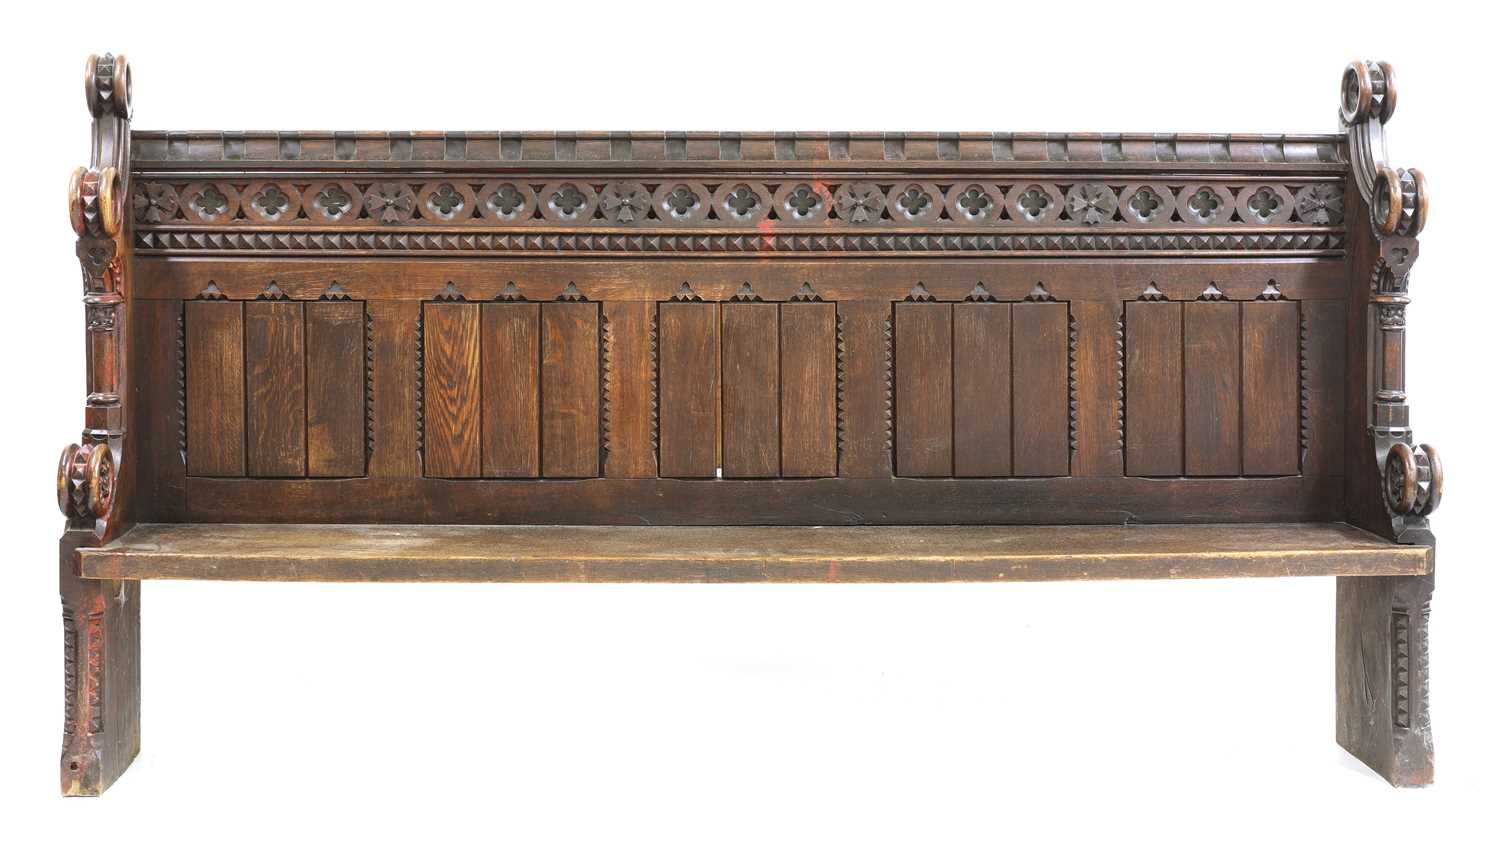 Lot 43 - A carved pew or settle